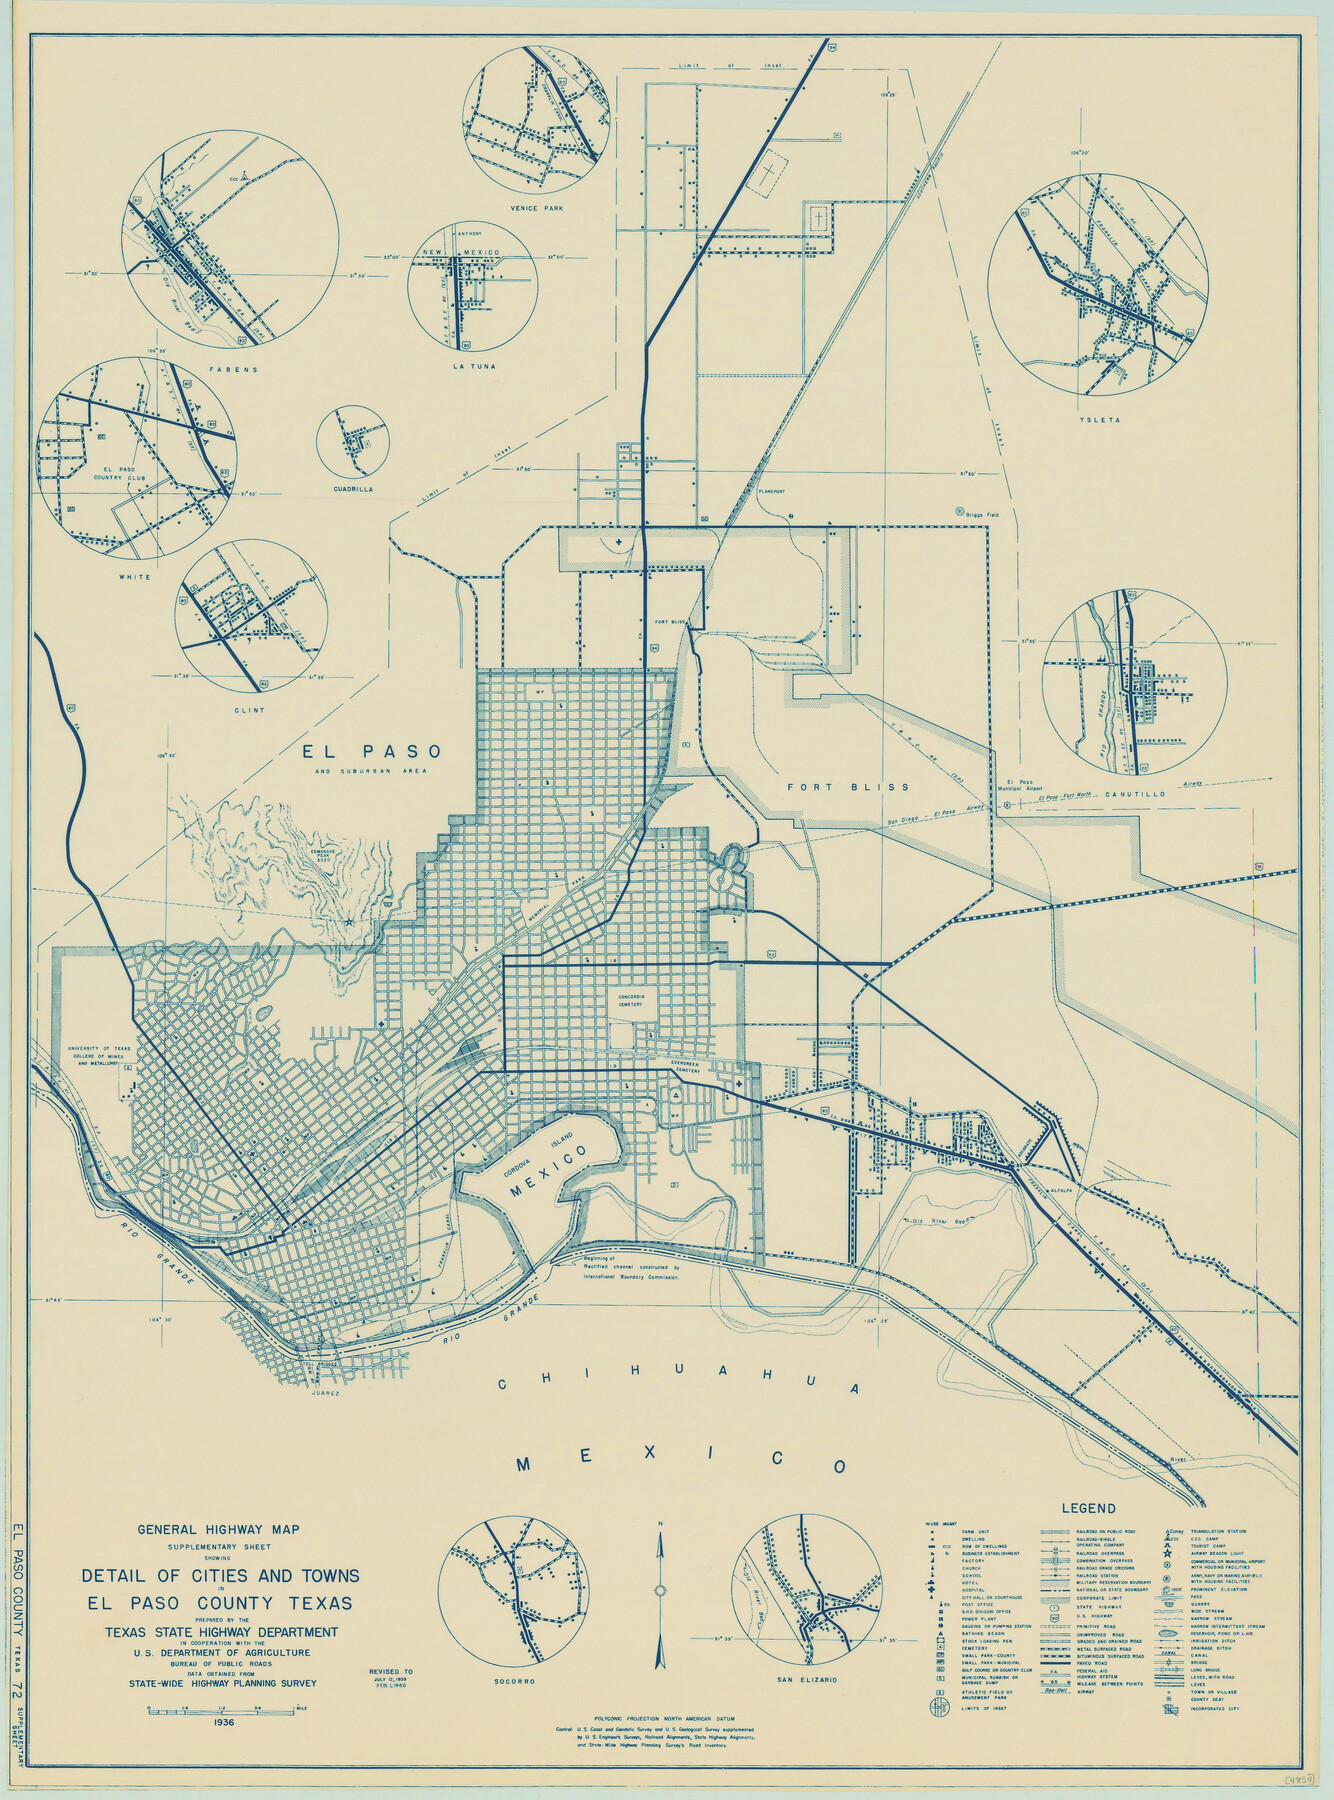 79085, General Highway Map.  Detail of Cities and Towns in El Paso County, Texas [El Paso and vicinity], Texas State Library and Archives